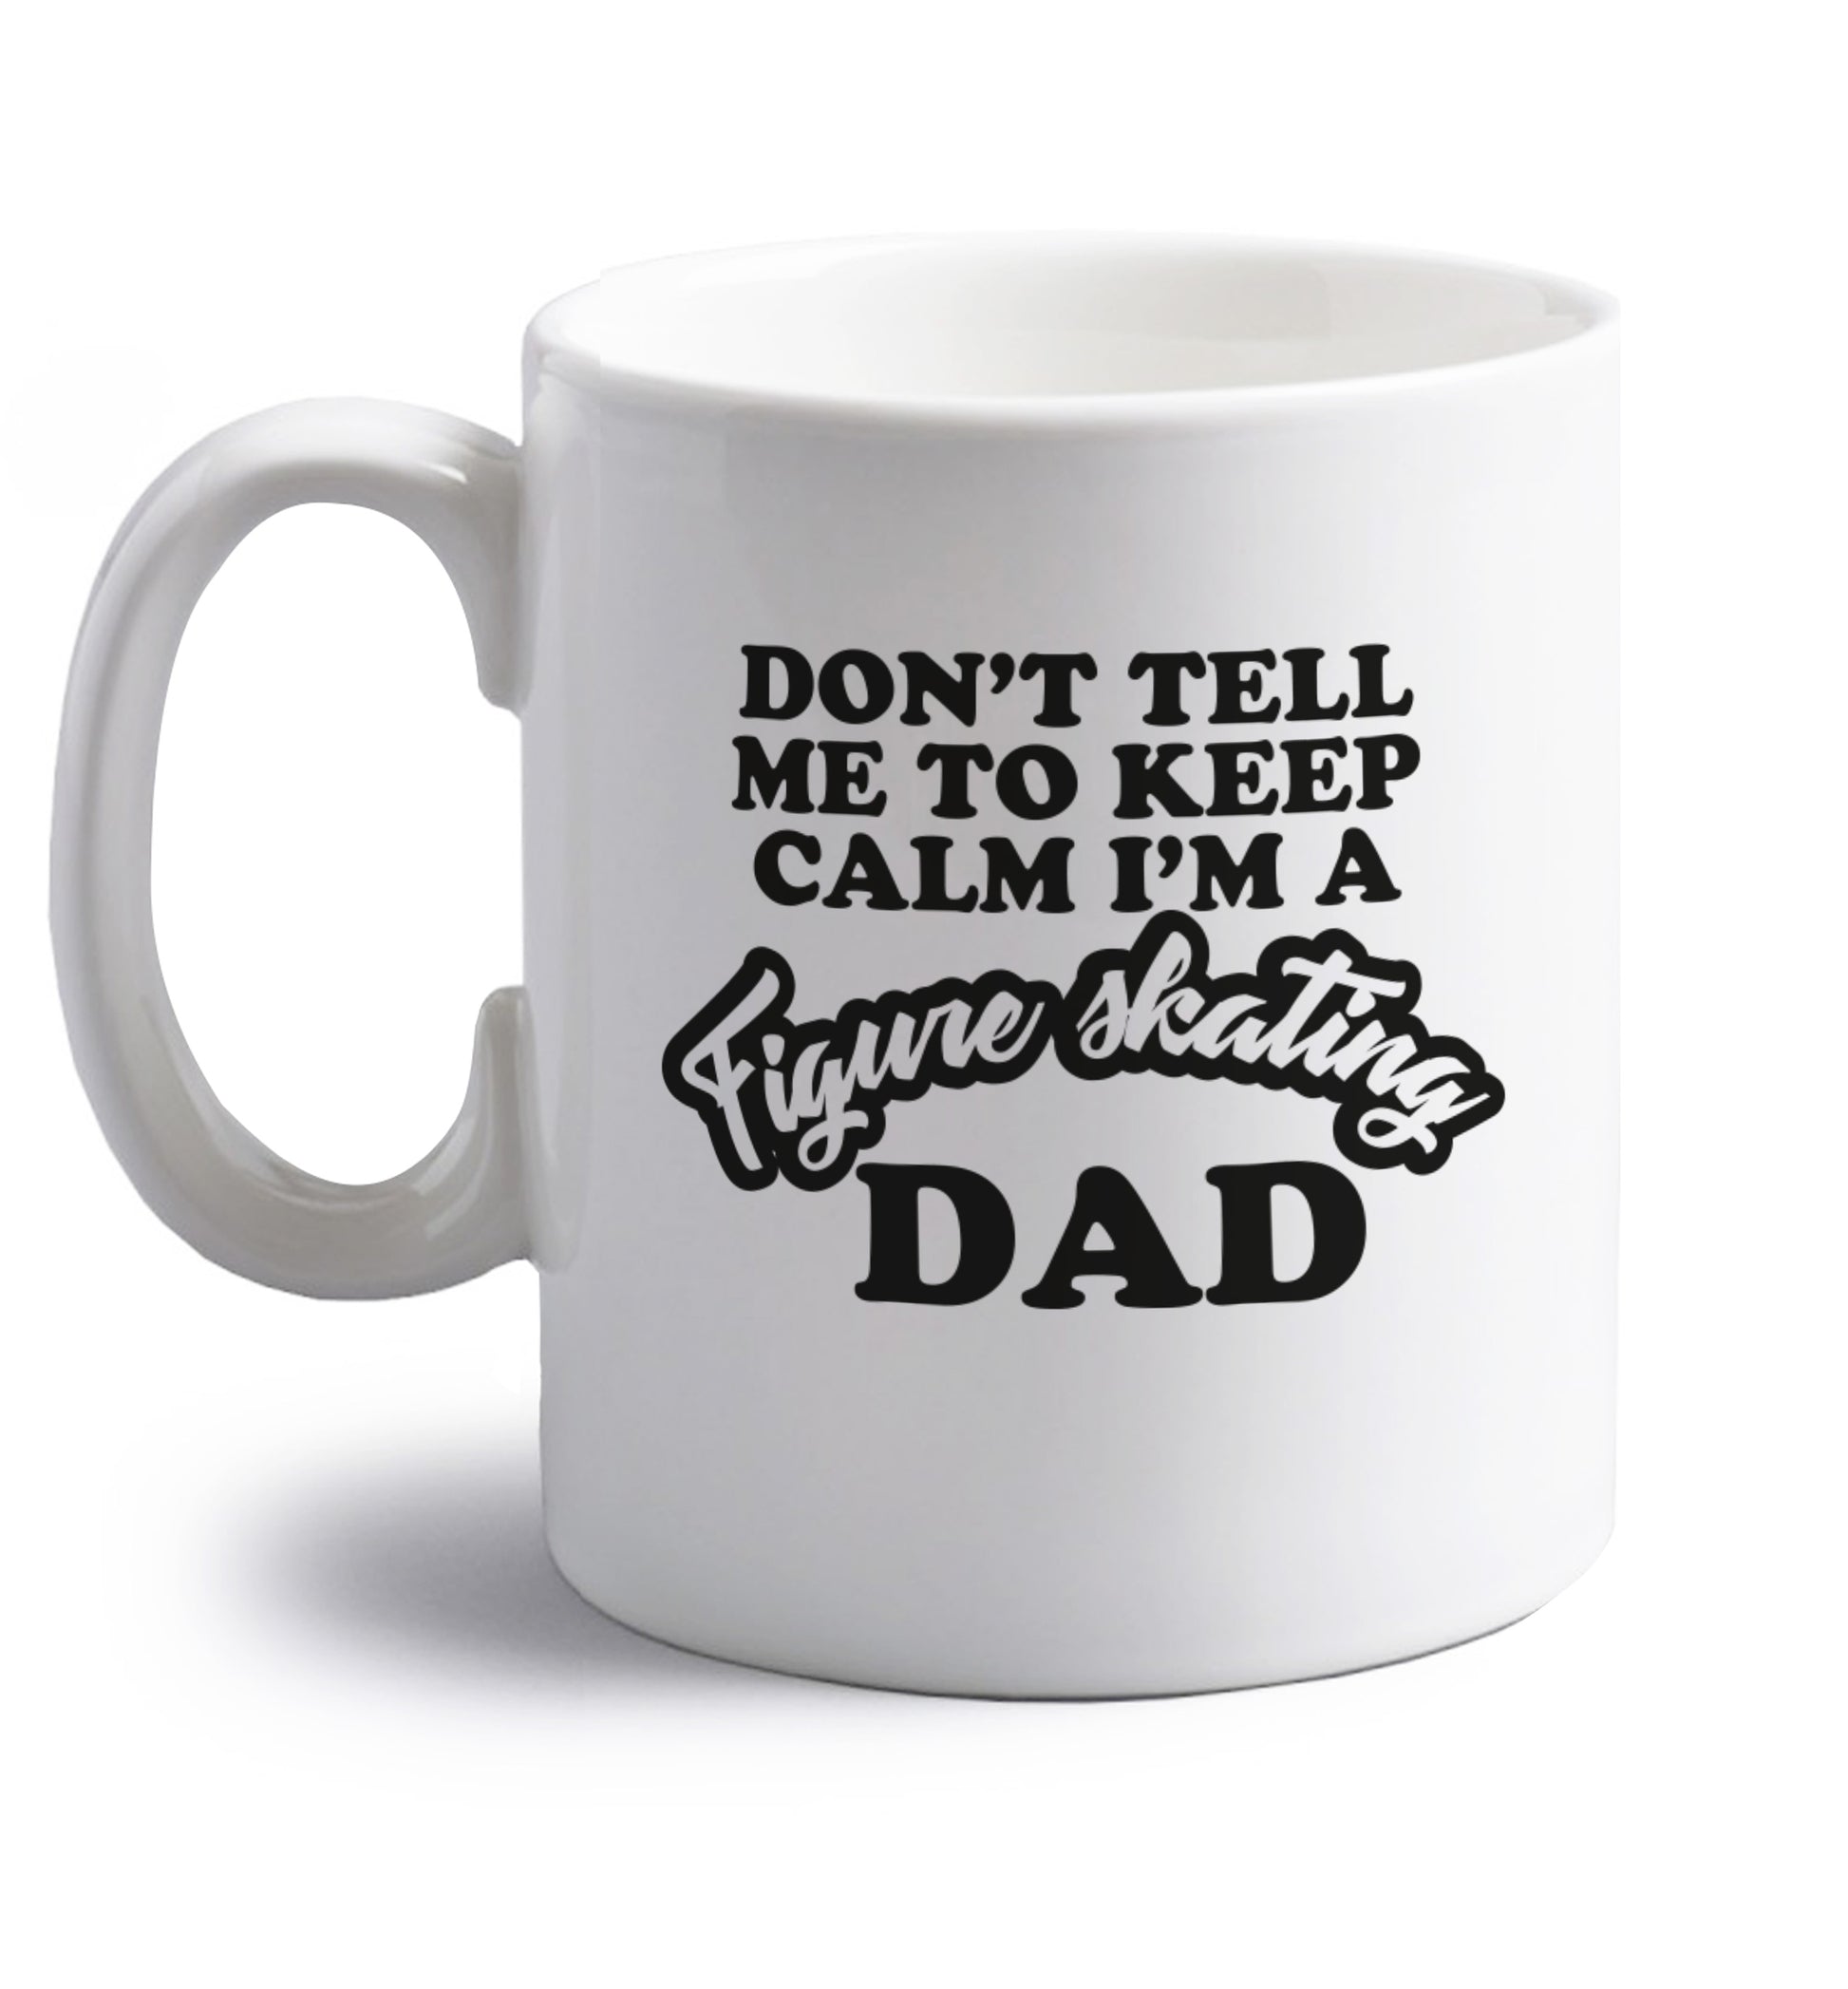 Don't tell me to keep calm I'm a figure skating dad right handed white ceramic mug 